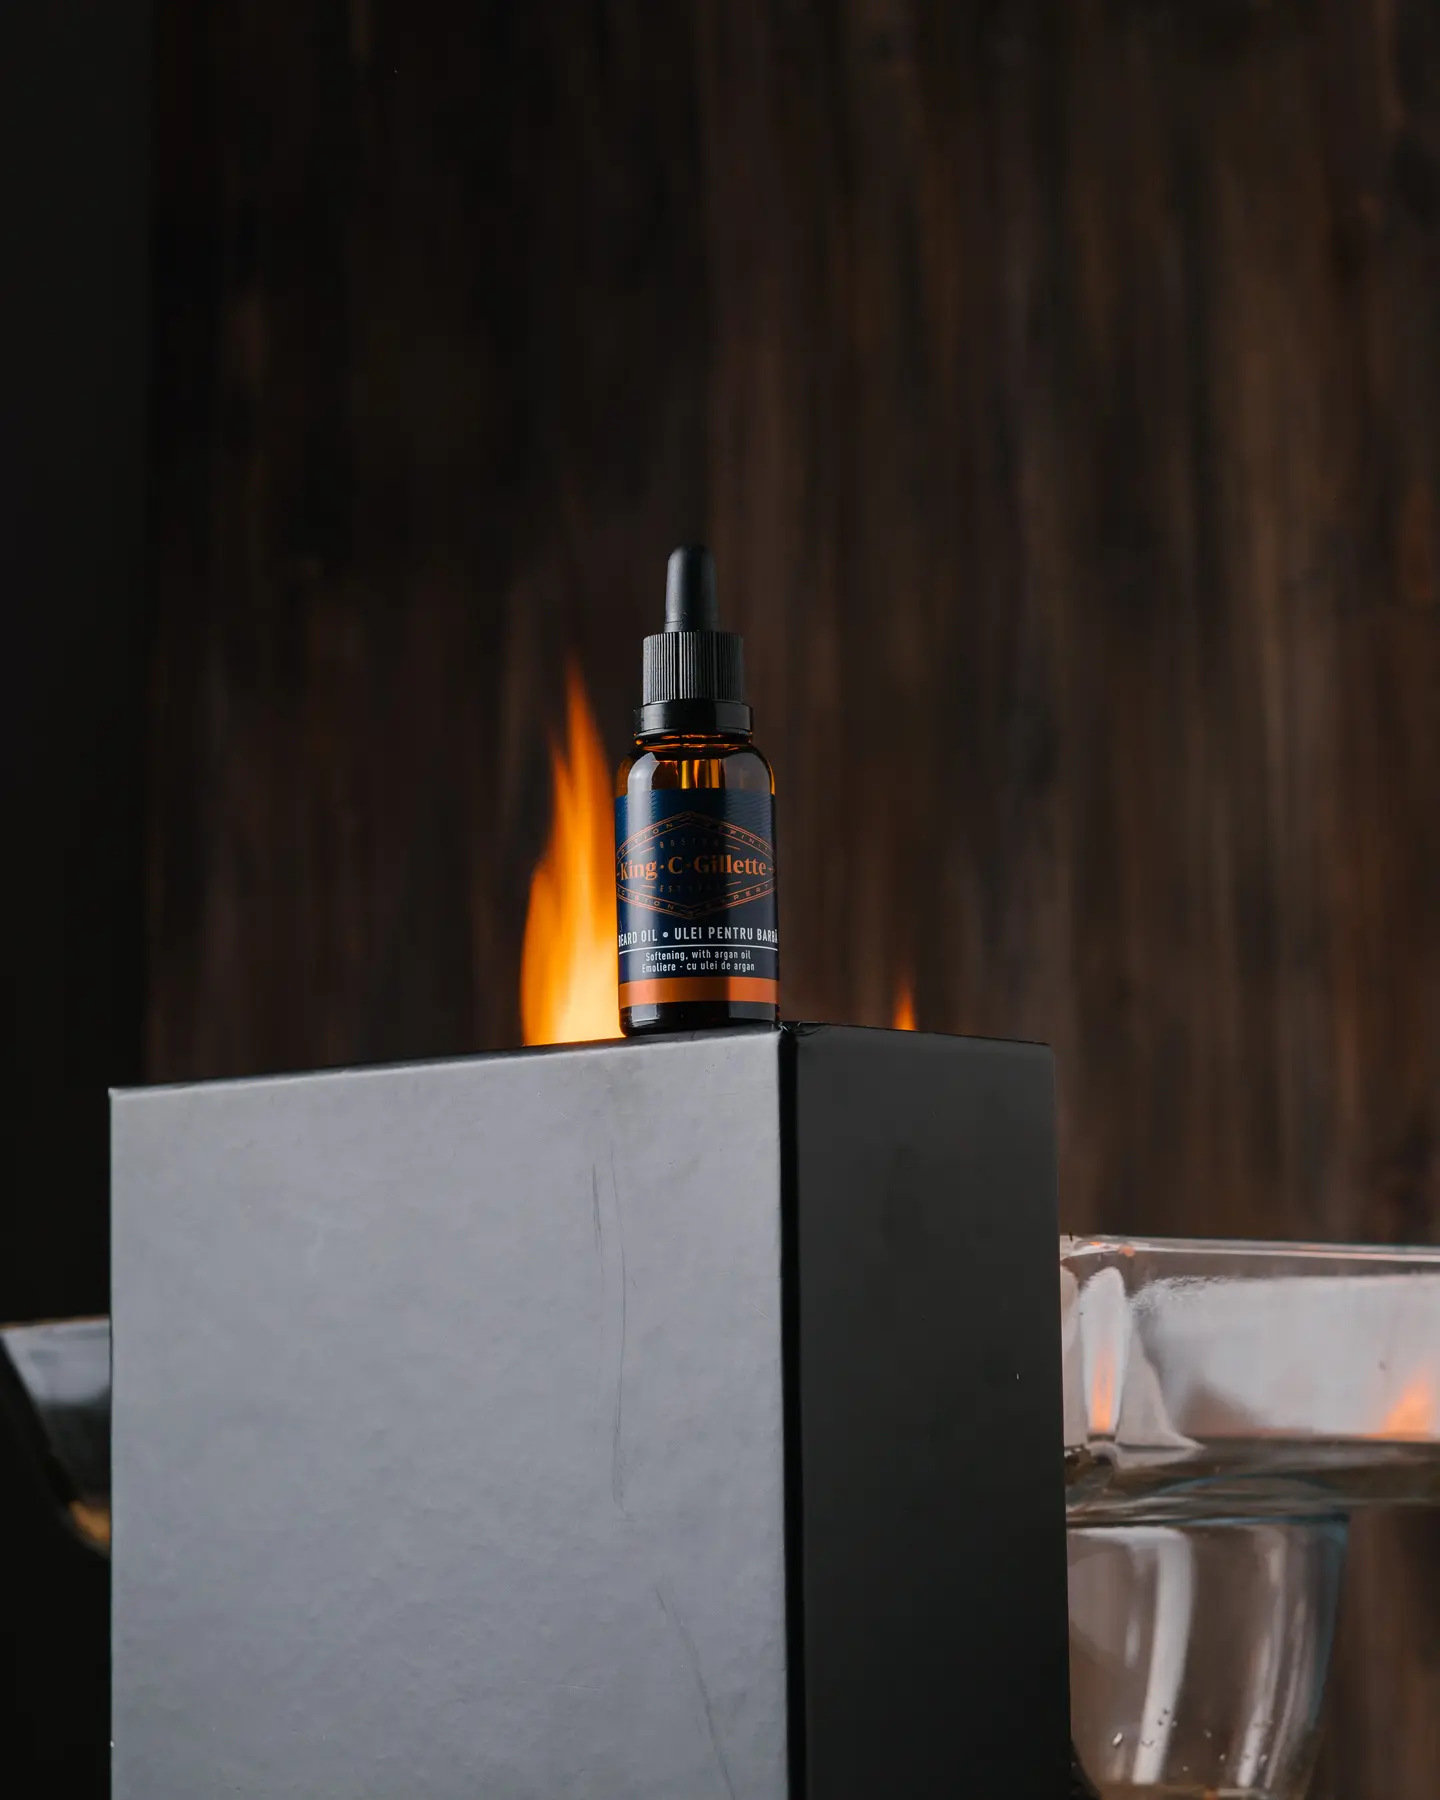 Left Fire. The photo that was taken as the source of the fire from the left side. On the black box is a bottle of King C Gillette of beard oil. It is lit from the left side. A wooden background is visible behind the jar and box.